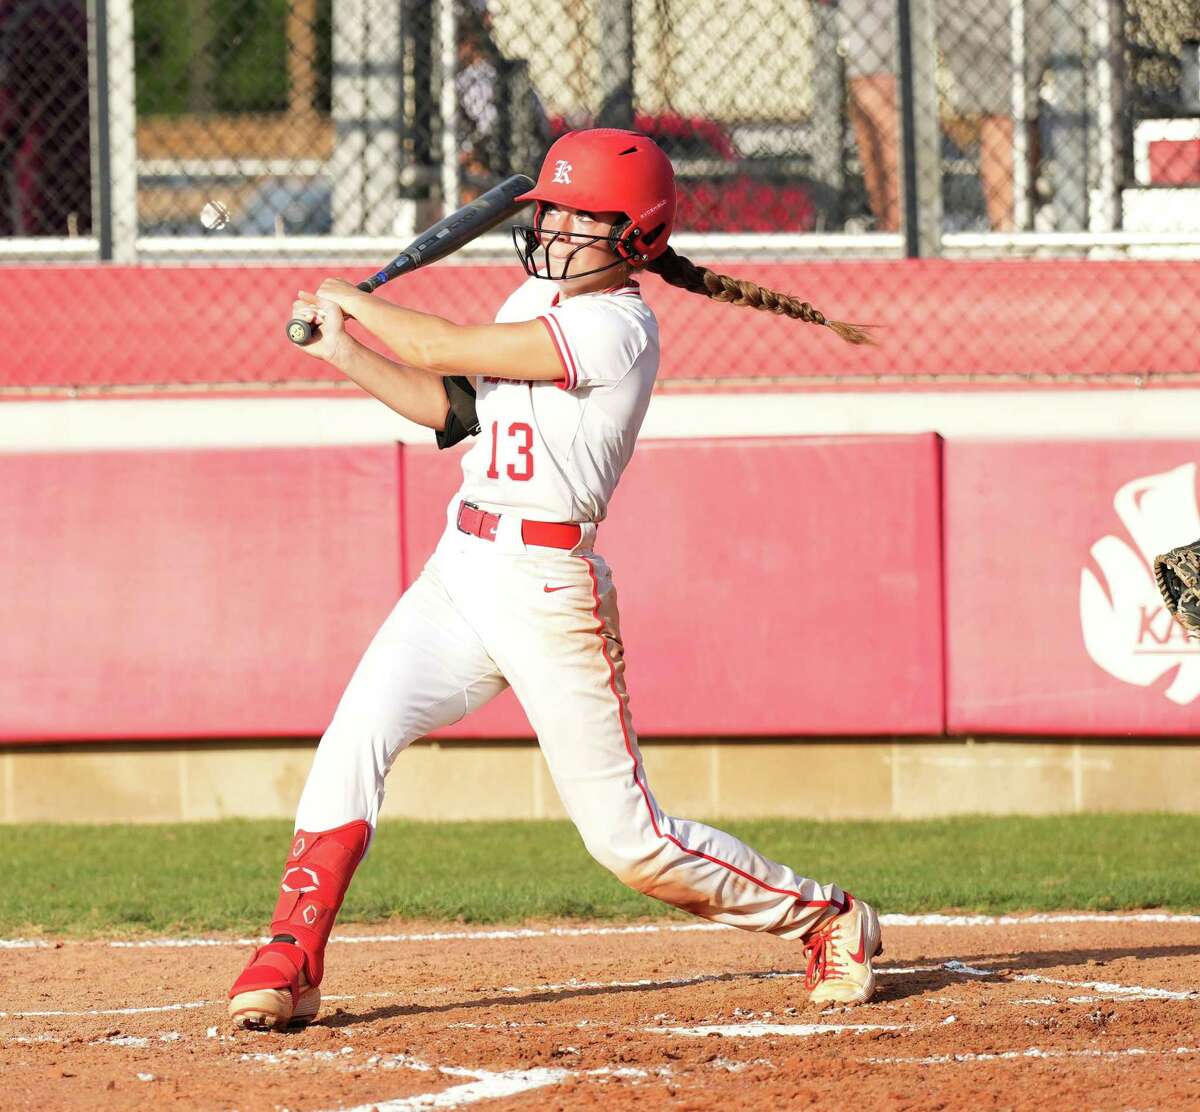 Katy’s Kailey Wyckoff (13) hits a home run in the third inning during a Region III-6A quarterfinals softball game at Katy High School on Friday, May 13, 2022 in Katy. Katy beat Cinco Ranch 10-0 in six innings.